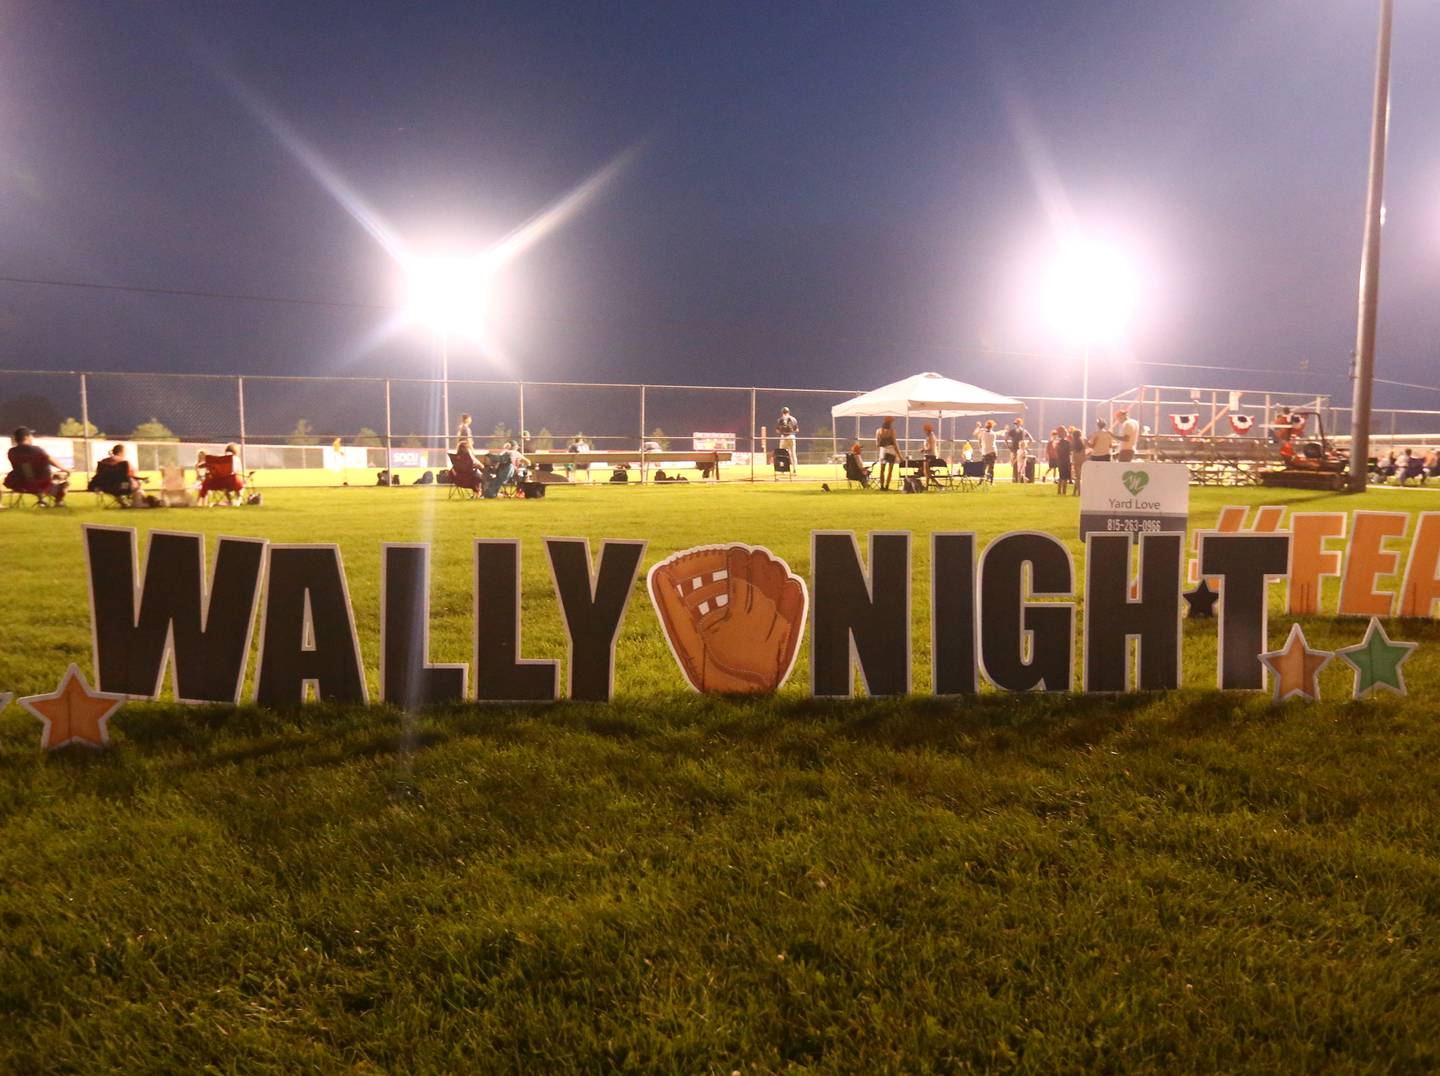 A sign showing "Wally Night" at the Illinois Valley Pistol Shrimp game decorated Veteran's Park in Peru on Saturday. The team honored the nationally known wallaroo who escaped in Peru last December. The team changed its name to the Peru Wallaroos in his honor for that one game.